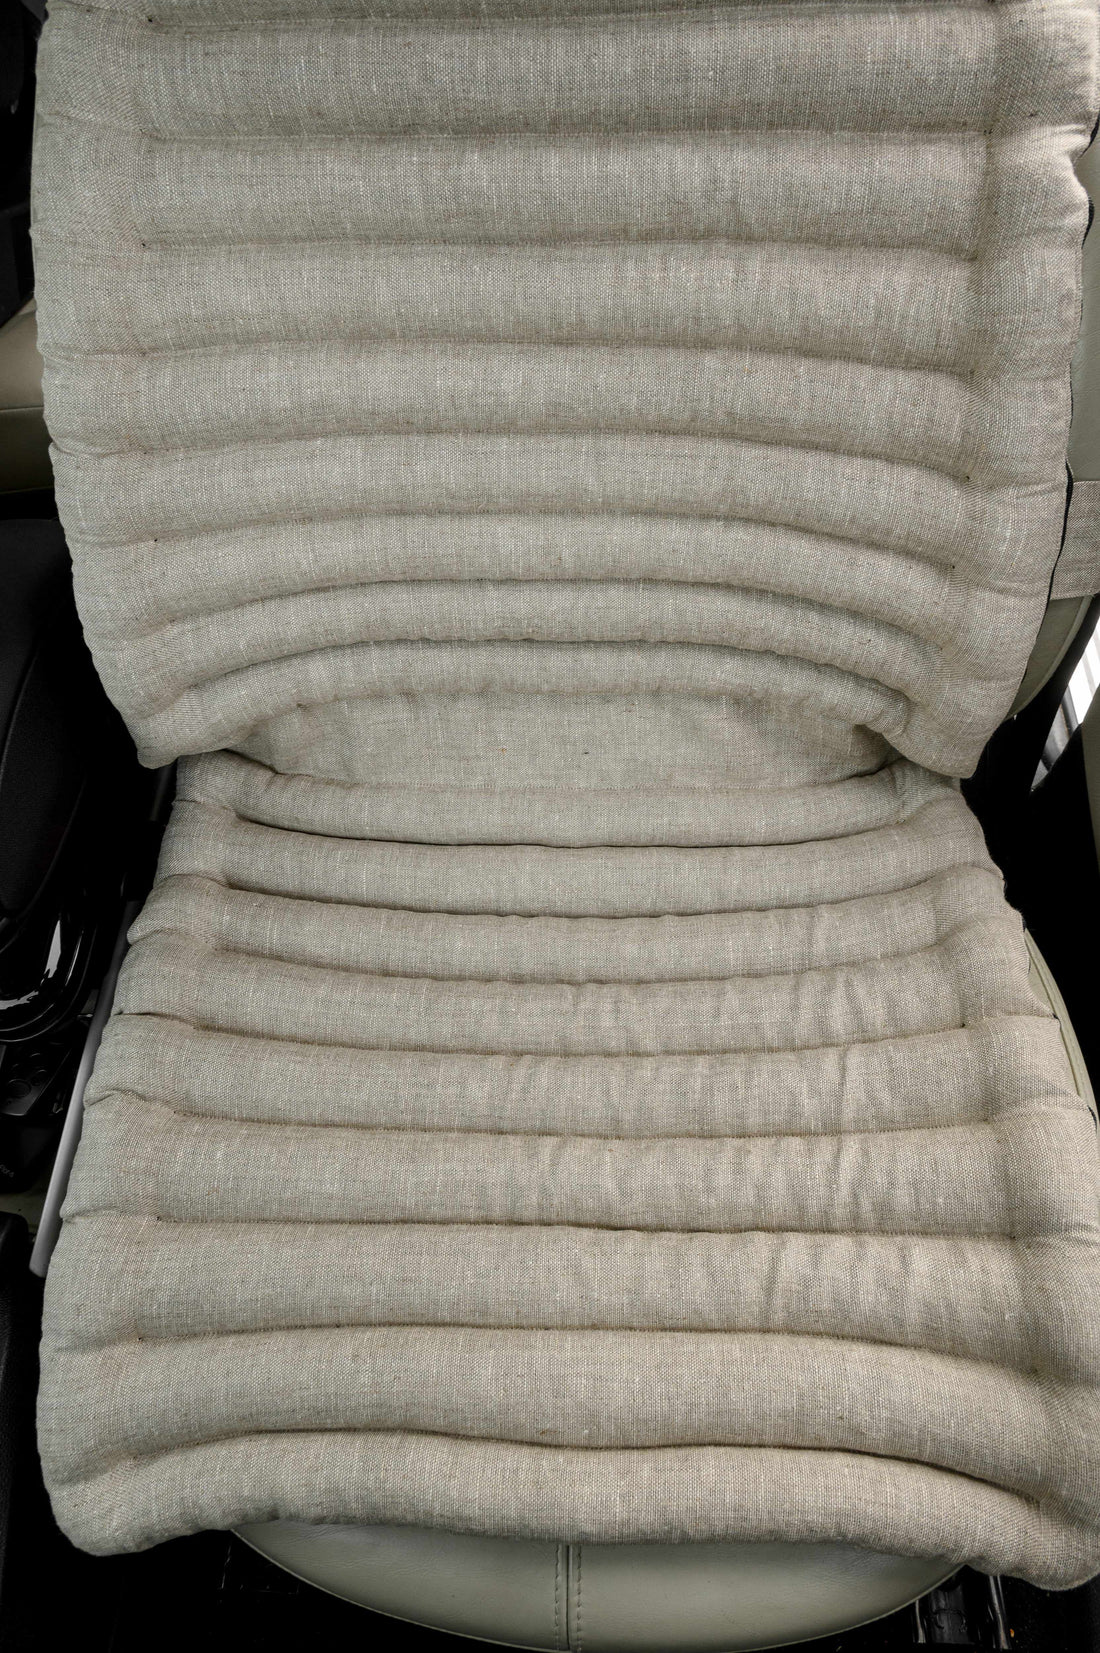 Linen Car Seat Cover Filled Organic Buckwheat Hulls in Linen 100% Fabric  Massage Seat Cover Buckwheat Organic Eco-friendly Seat Hand Made 